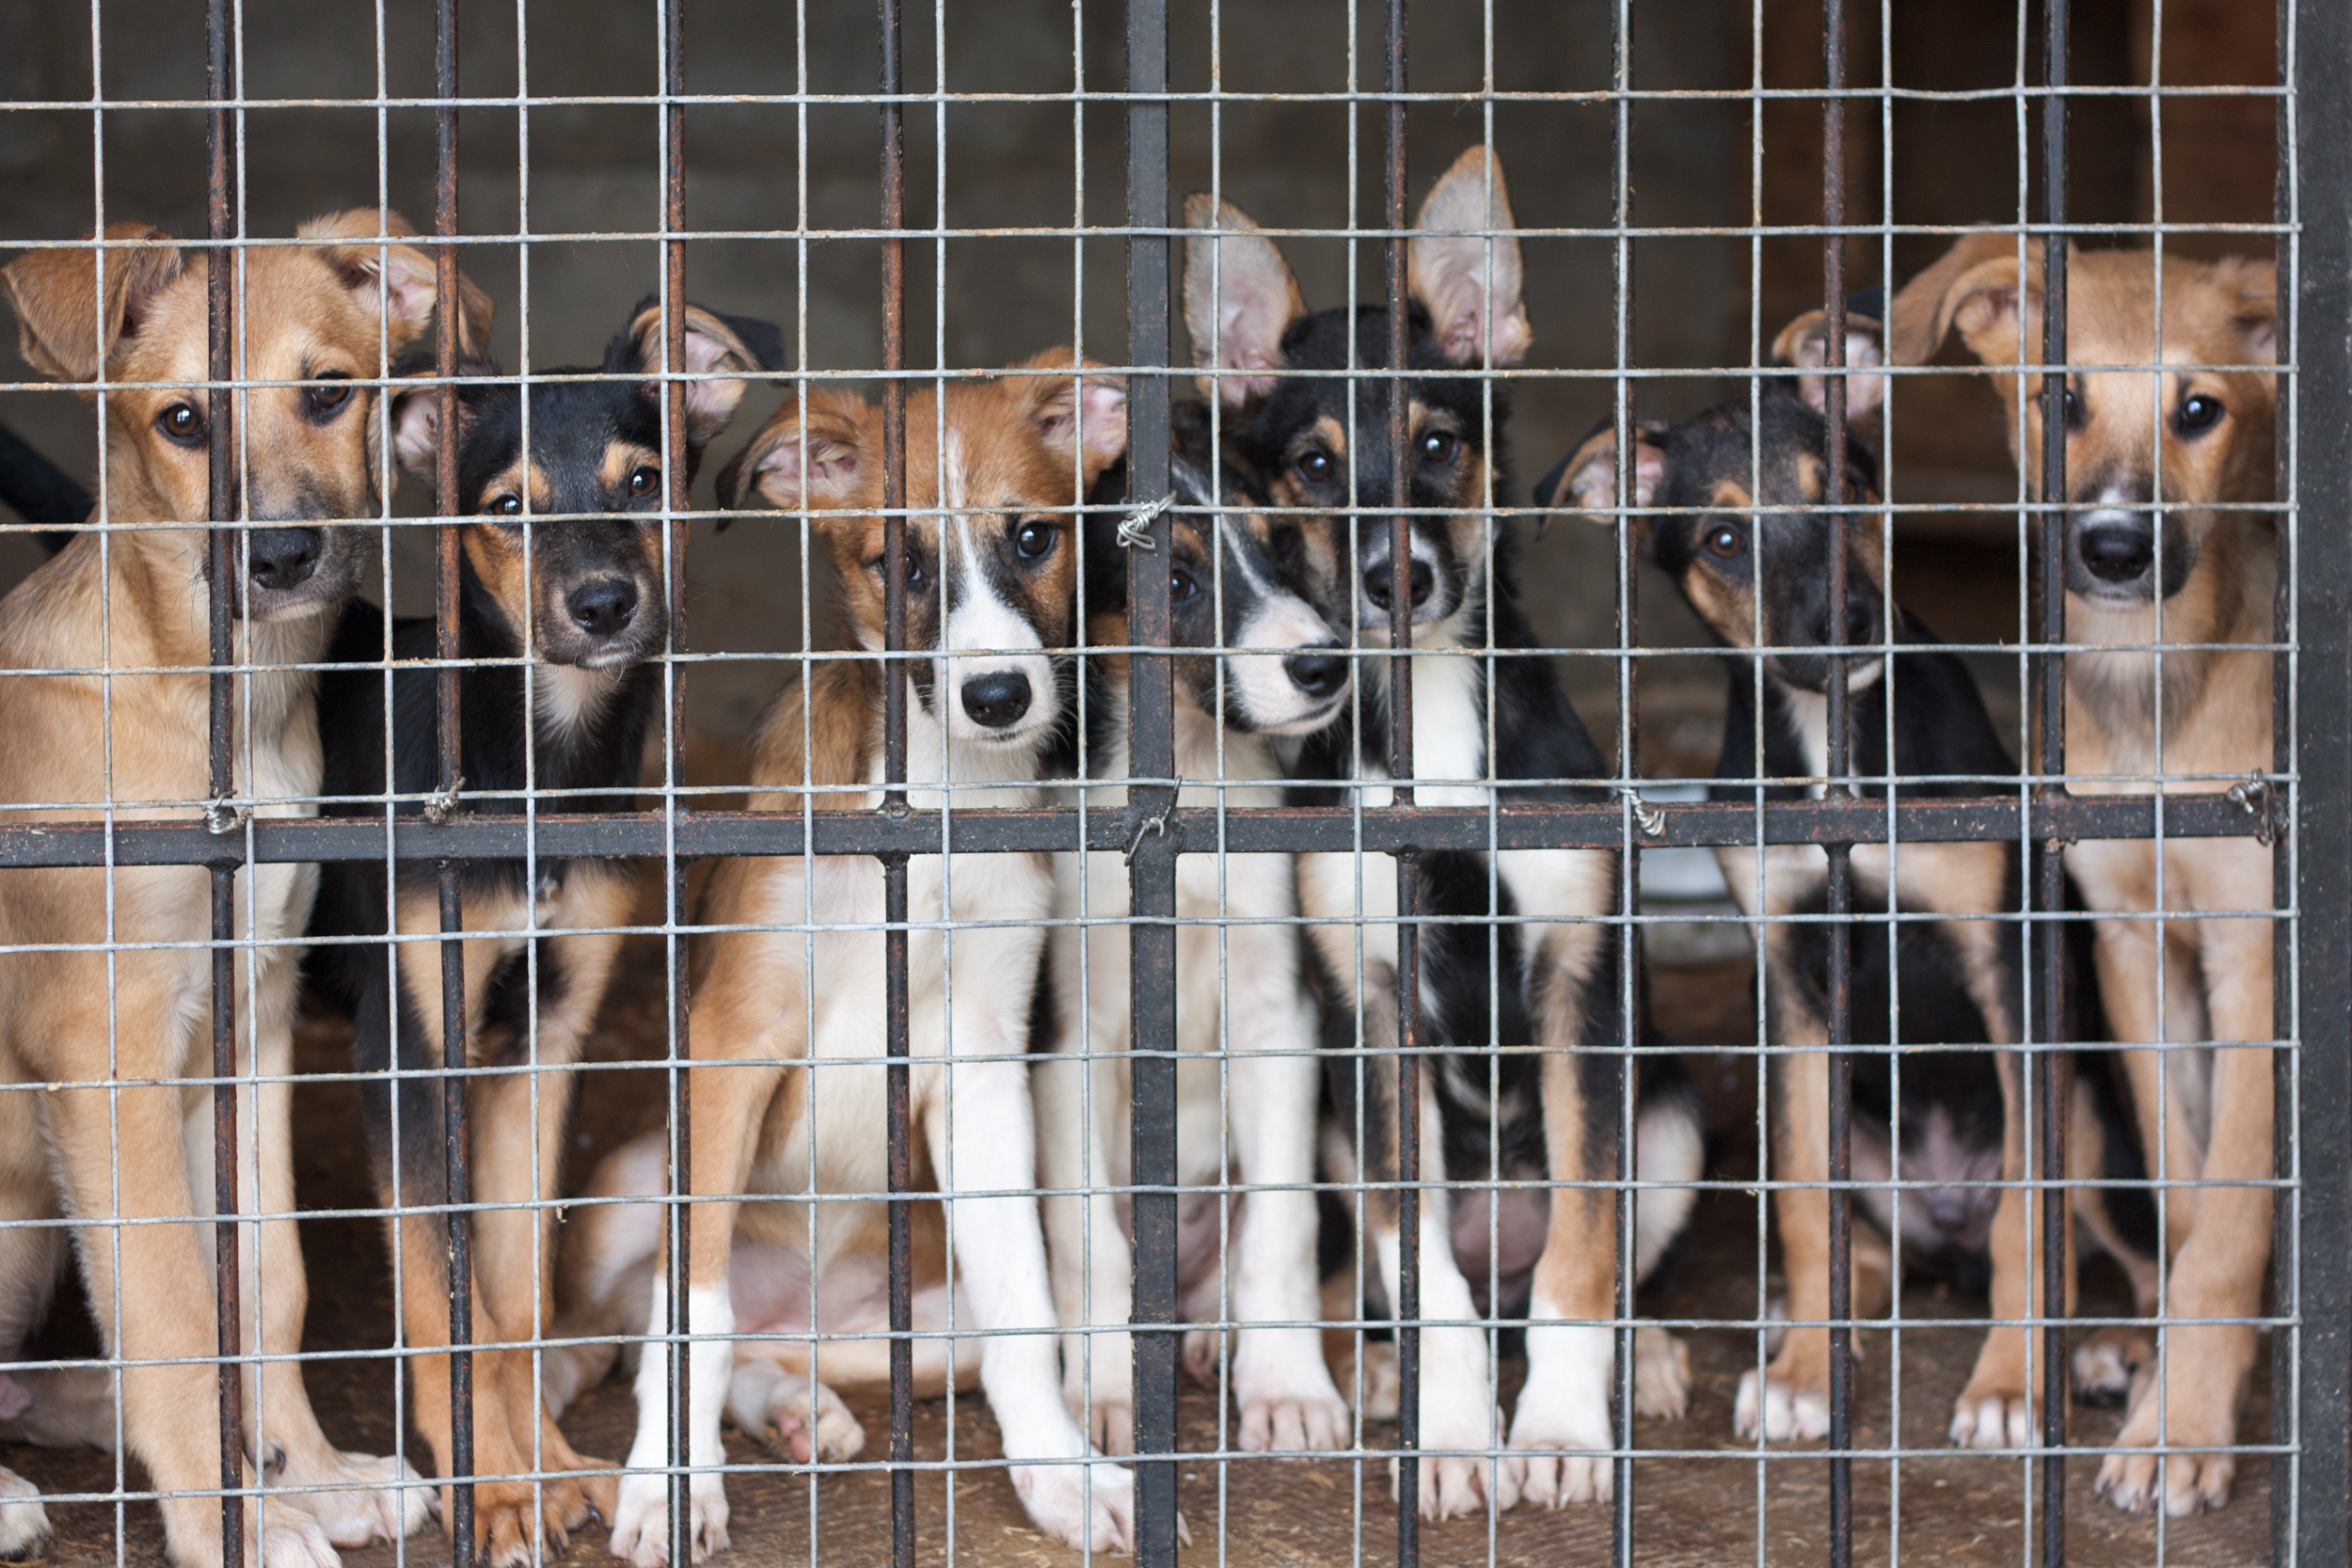 Arizona Mandates all Dogs Sold In Pet Stores to Come from Shelters